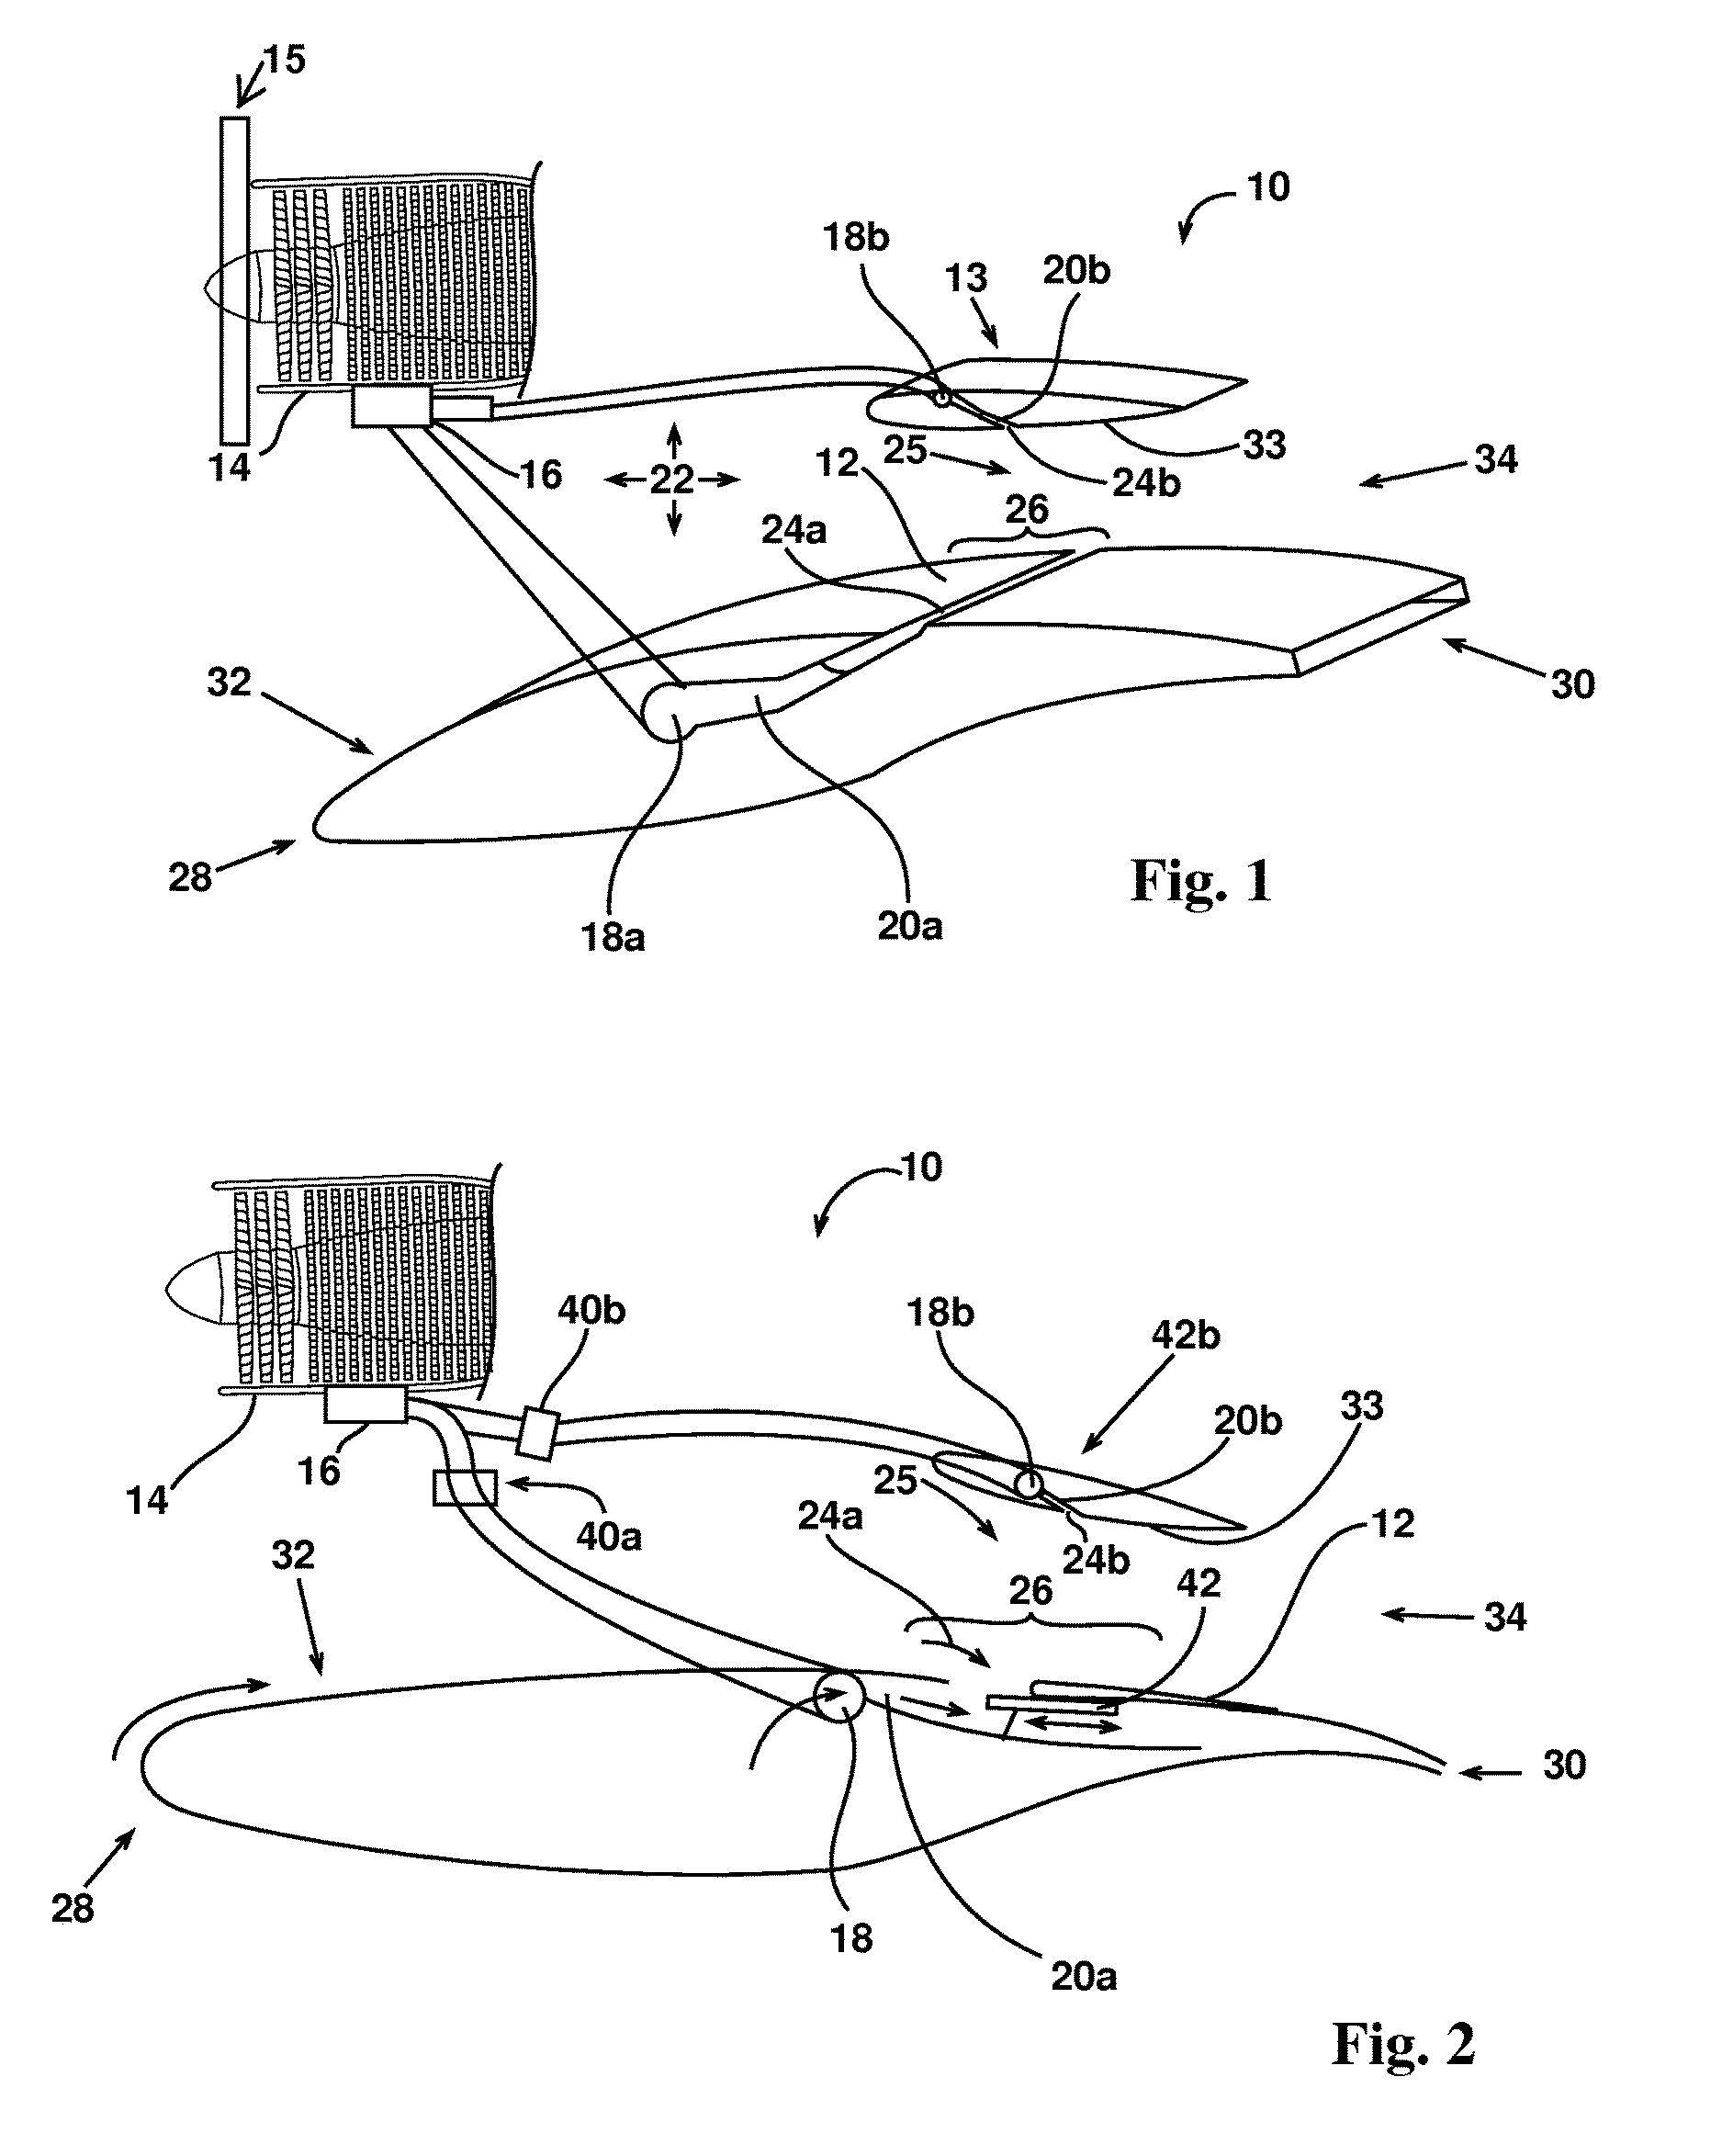 Augmented propulsion system with boundary layer suction and wake blowing